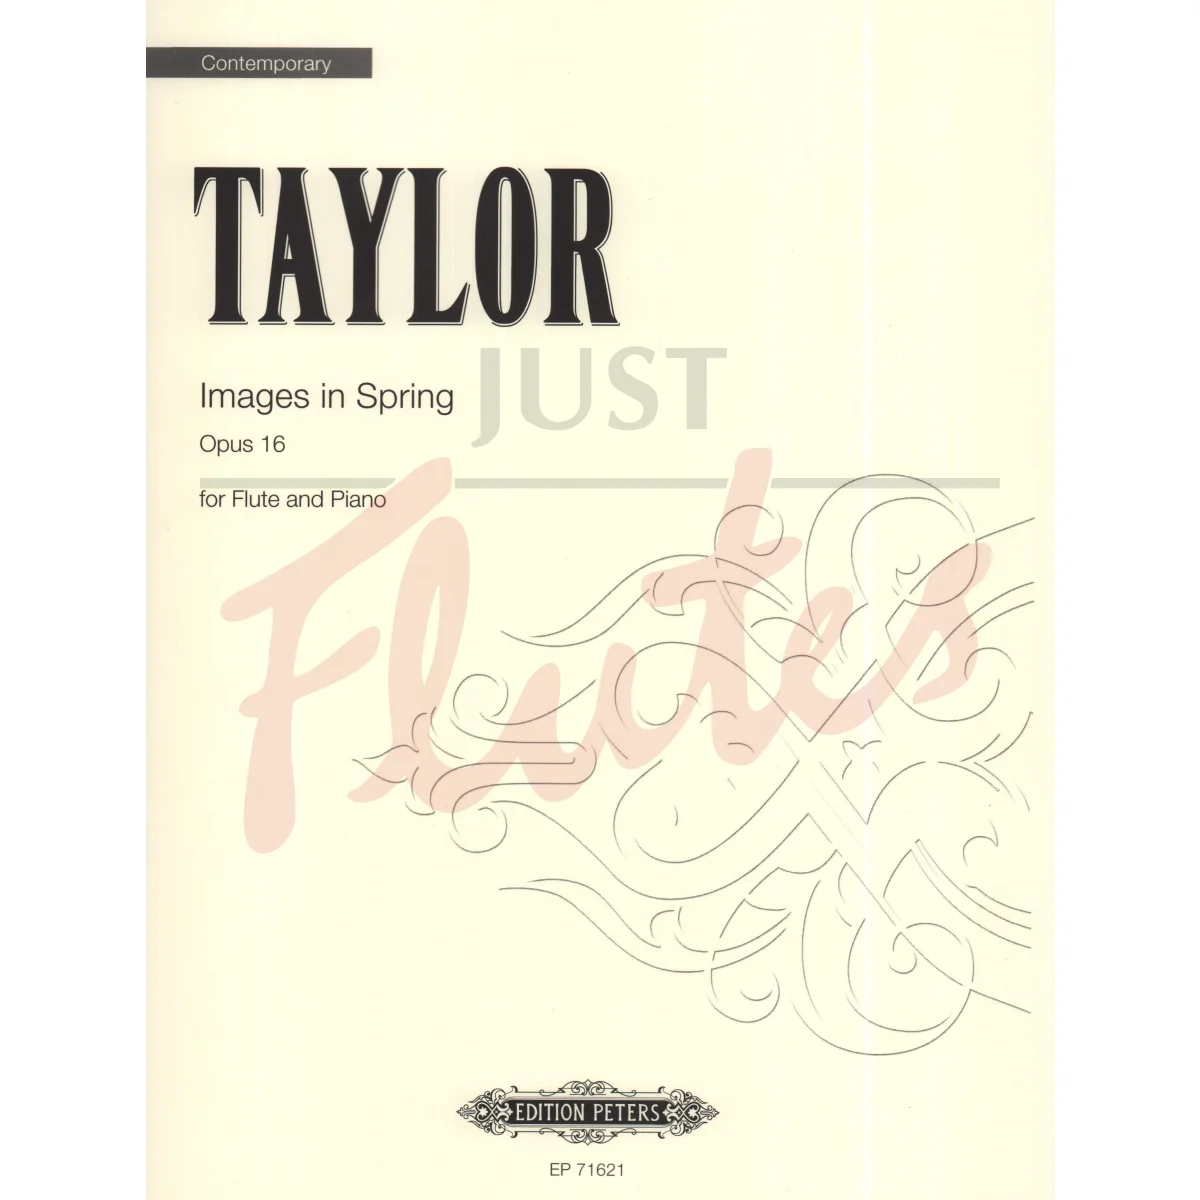 Images in Spring for Flute and Piano